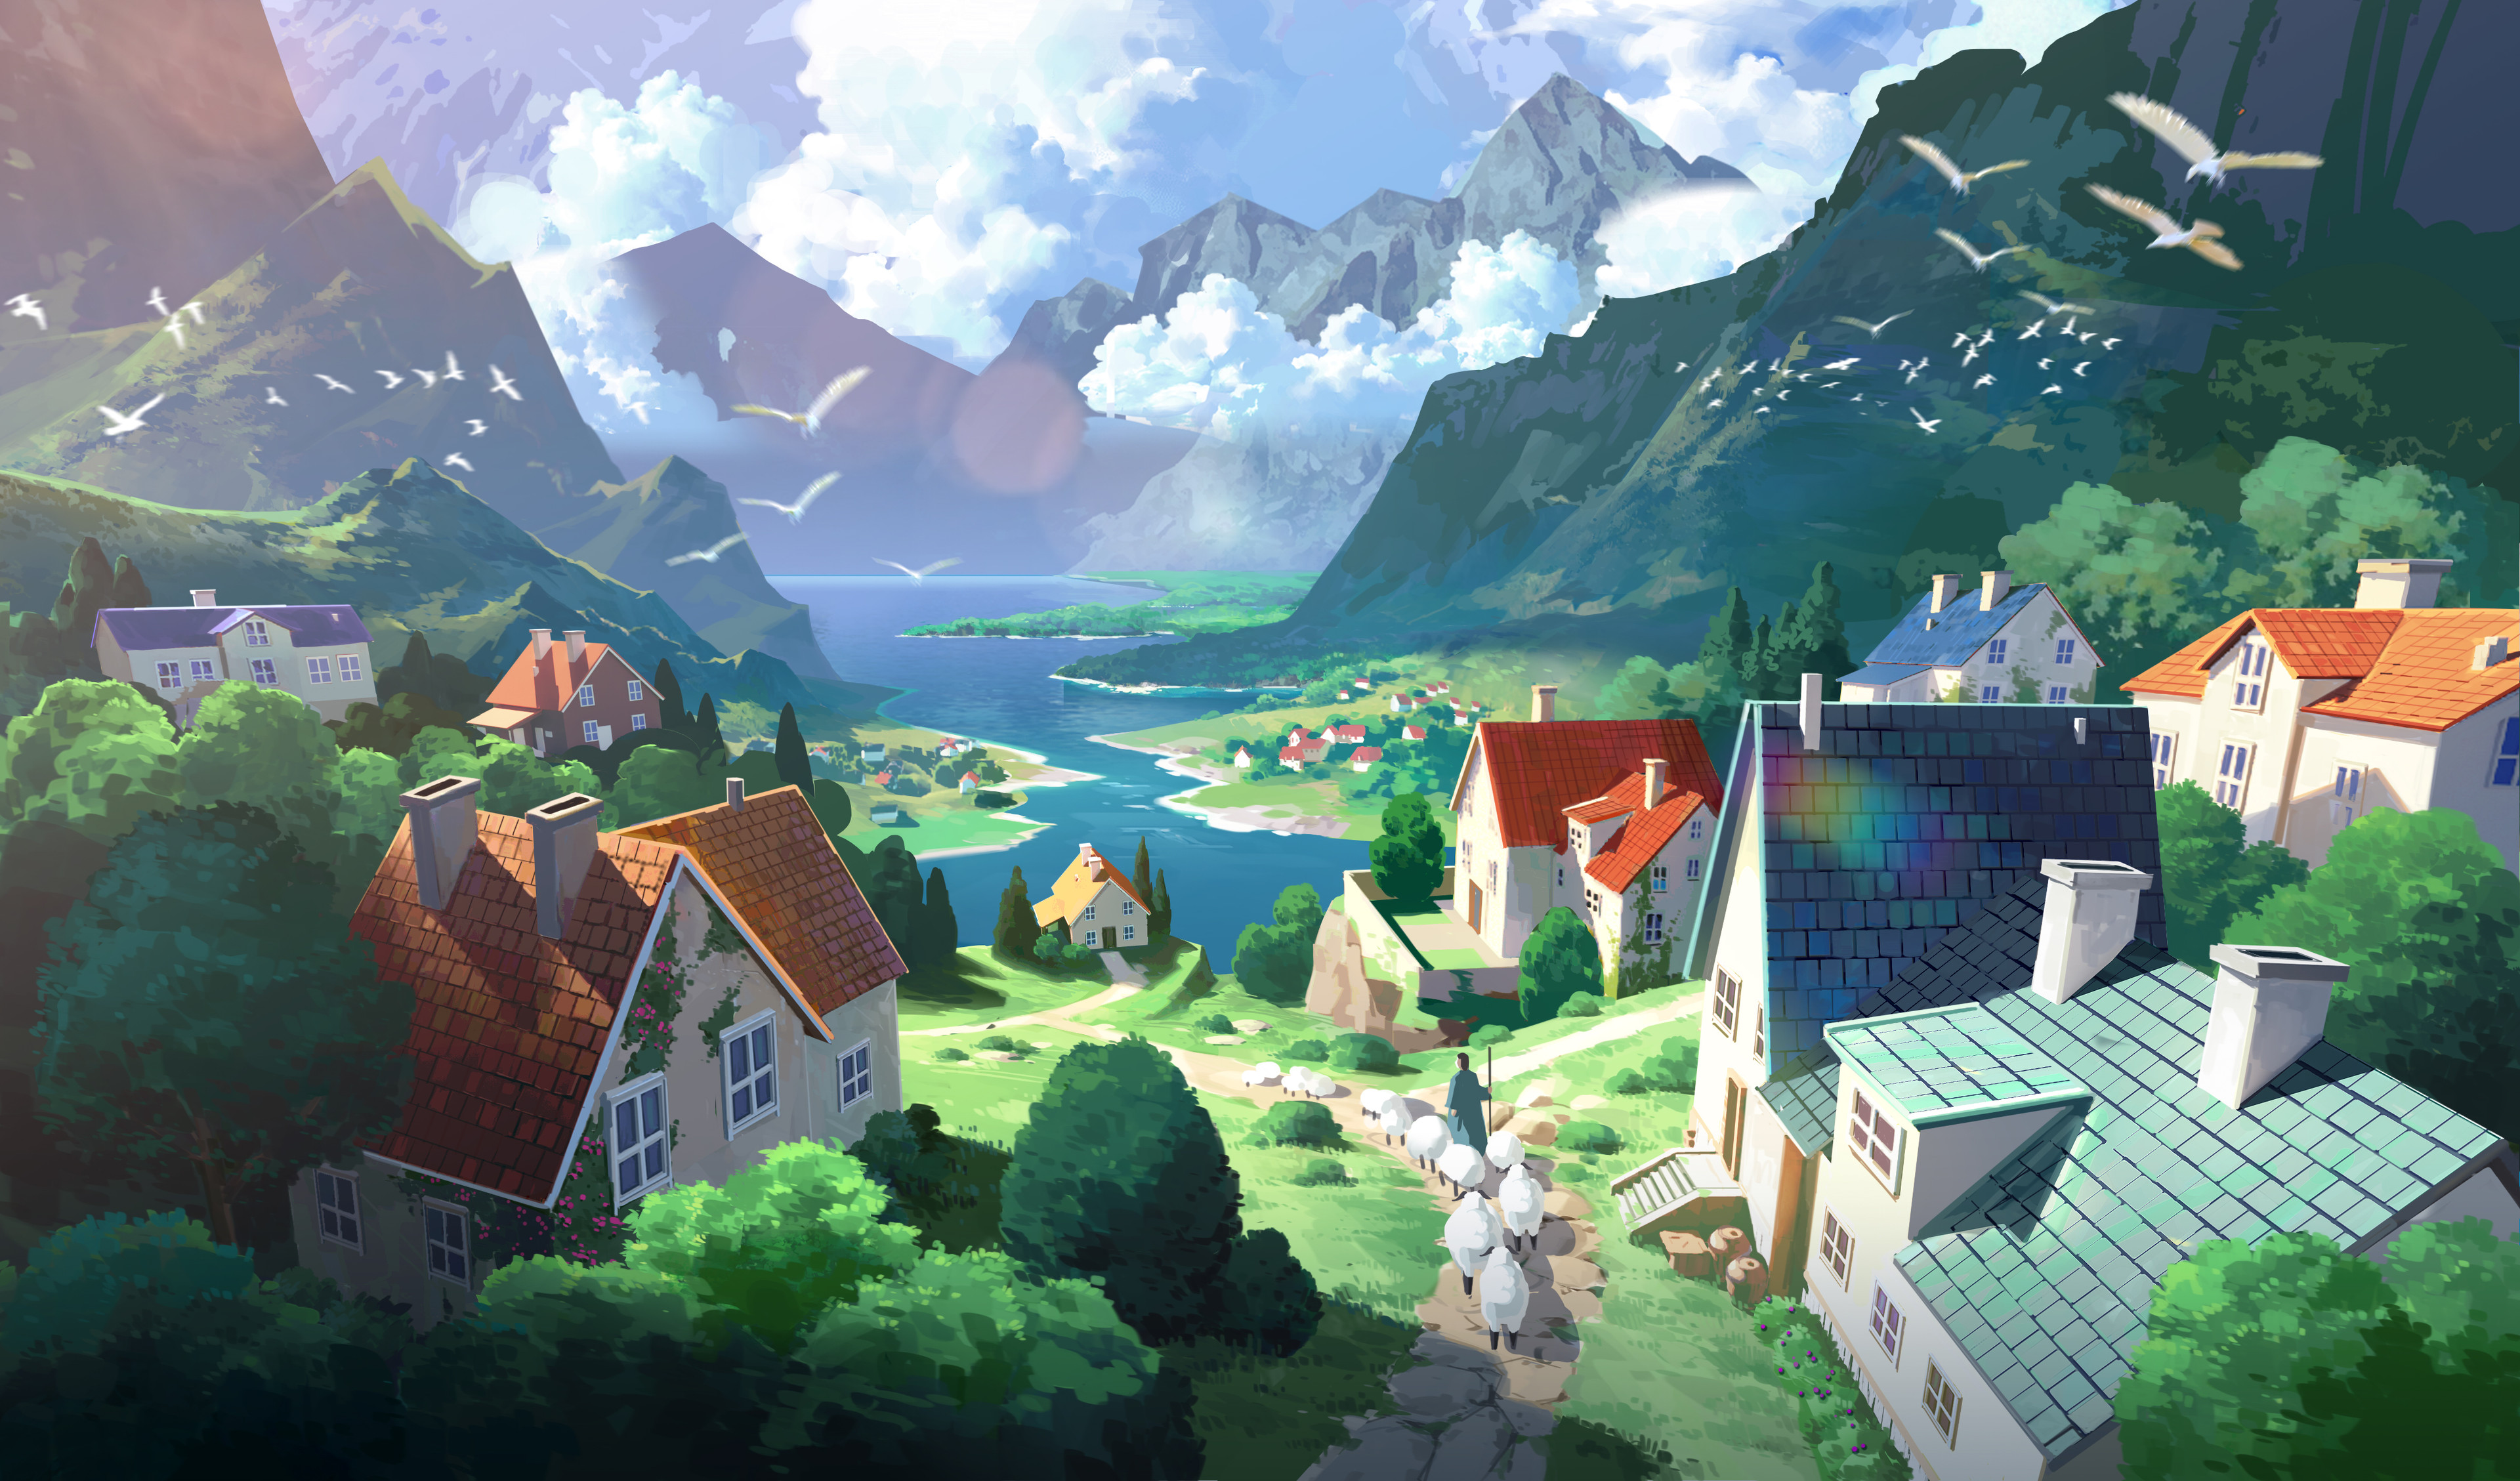 Town in Ghibli style by Kevin Gnutzmans